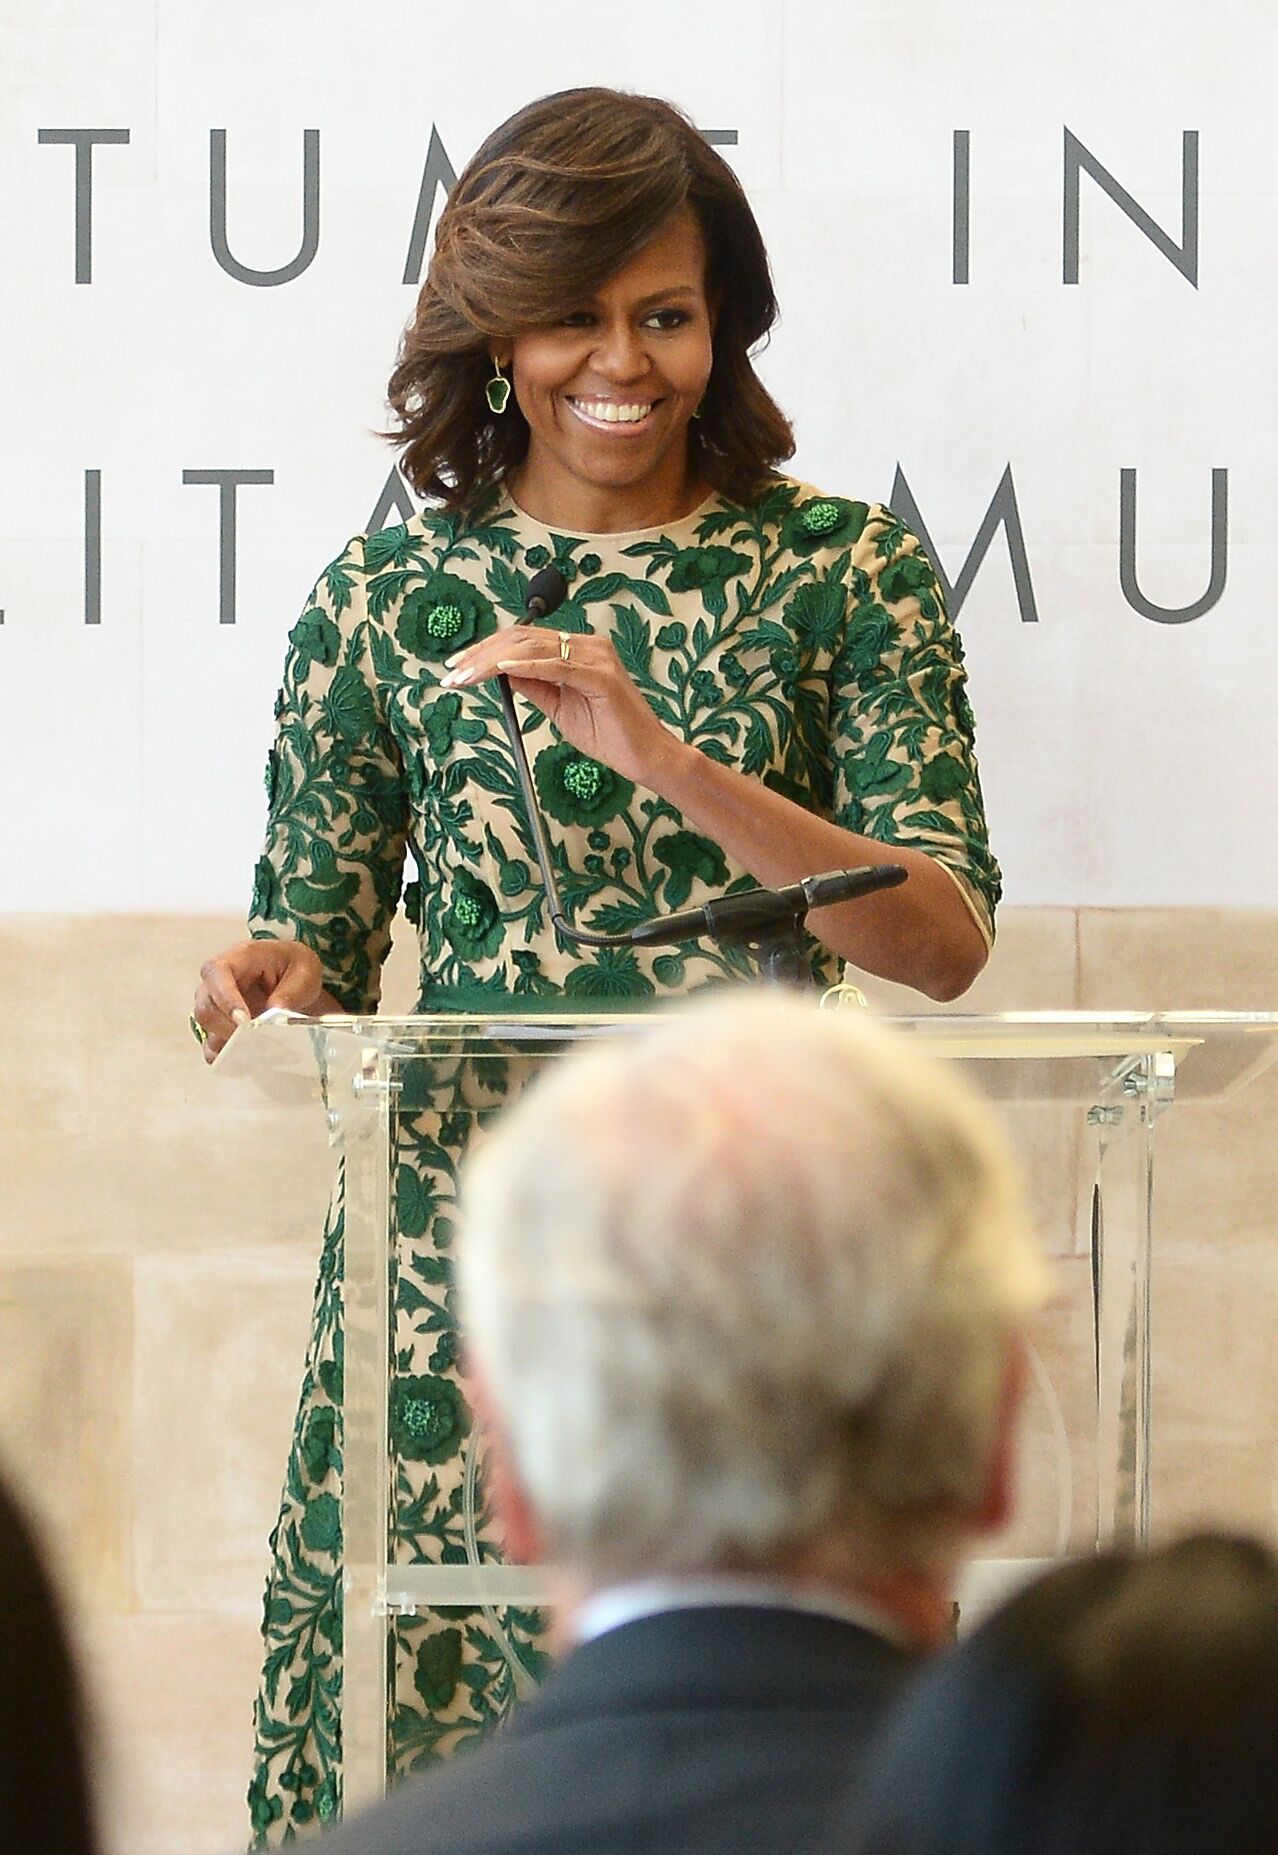 Former First Lady of the United States Michelle Obama speaks onstage at the Anna Wintour Costume Center Grand Opening at the Metropolitan Museum of Art on May 5, 2014. | Photo: Getty Images